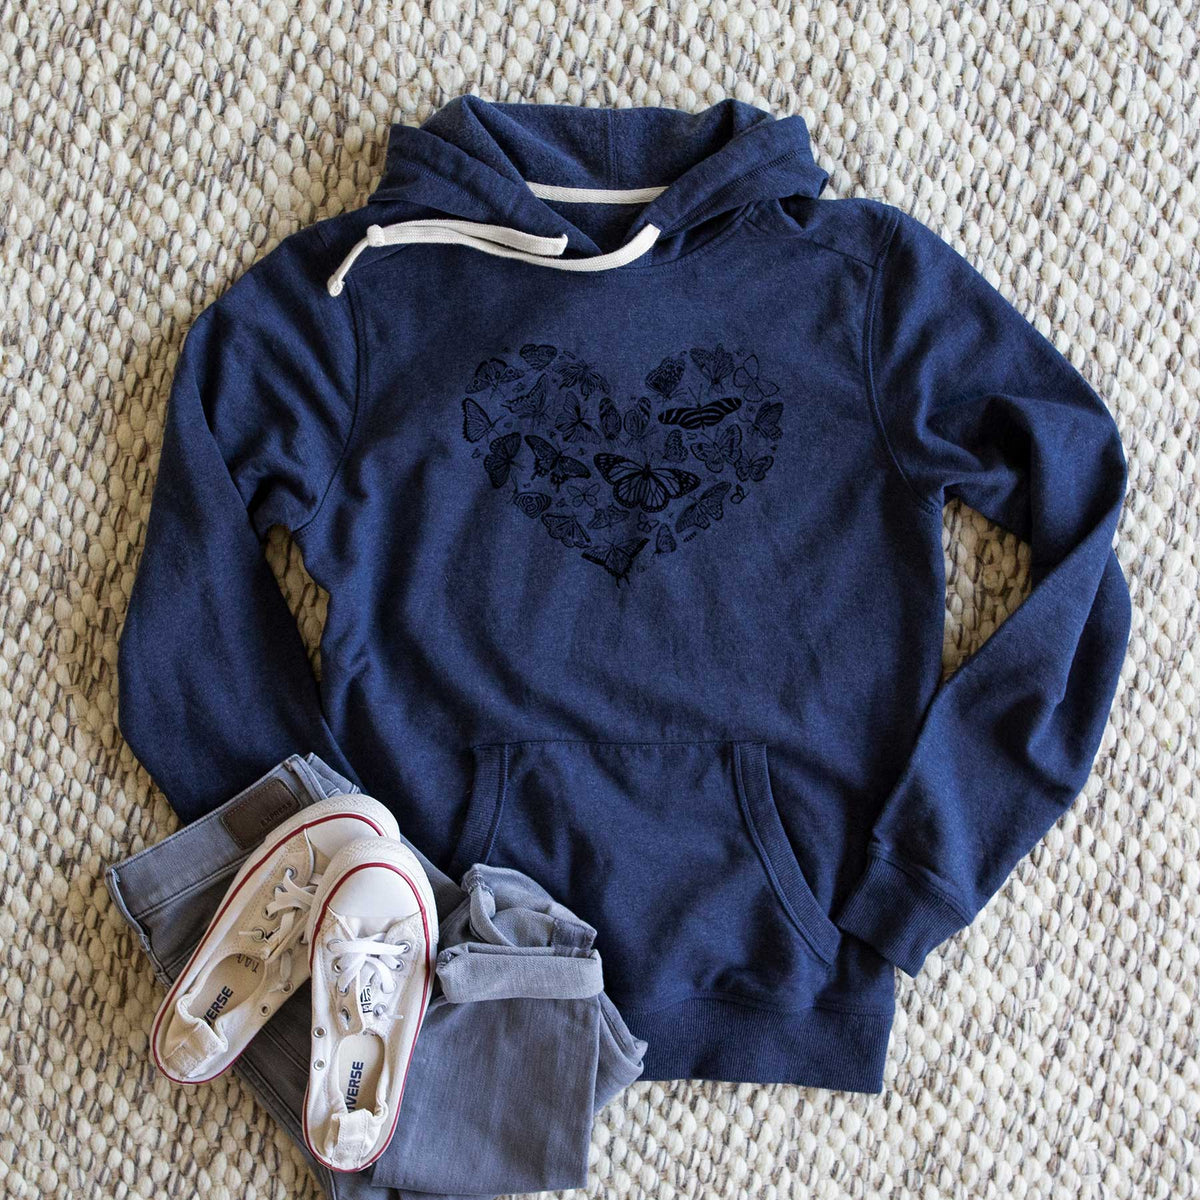 Heart Full of Butterflies - Unisex Recycled Hoodie - CLOSEOUT - FINAL SALE